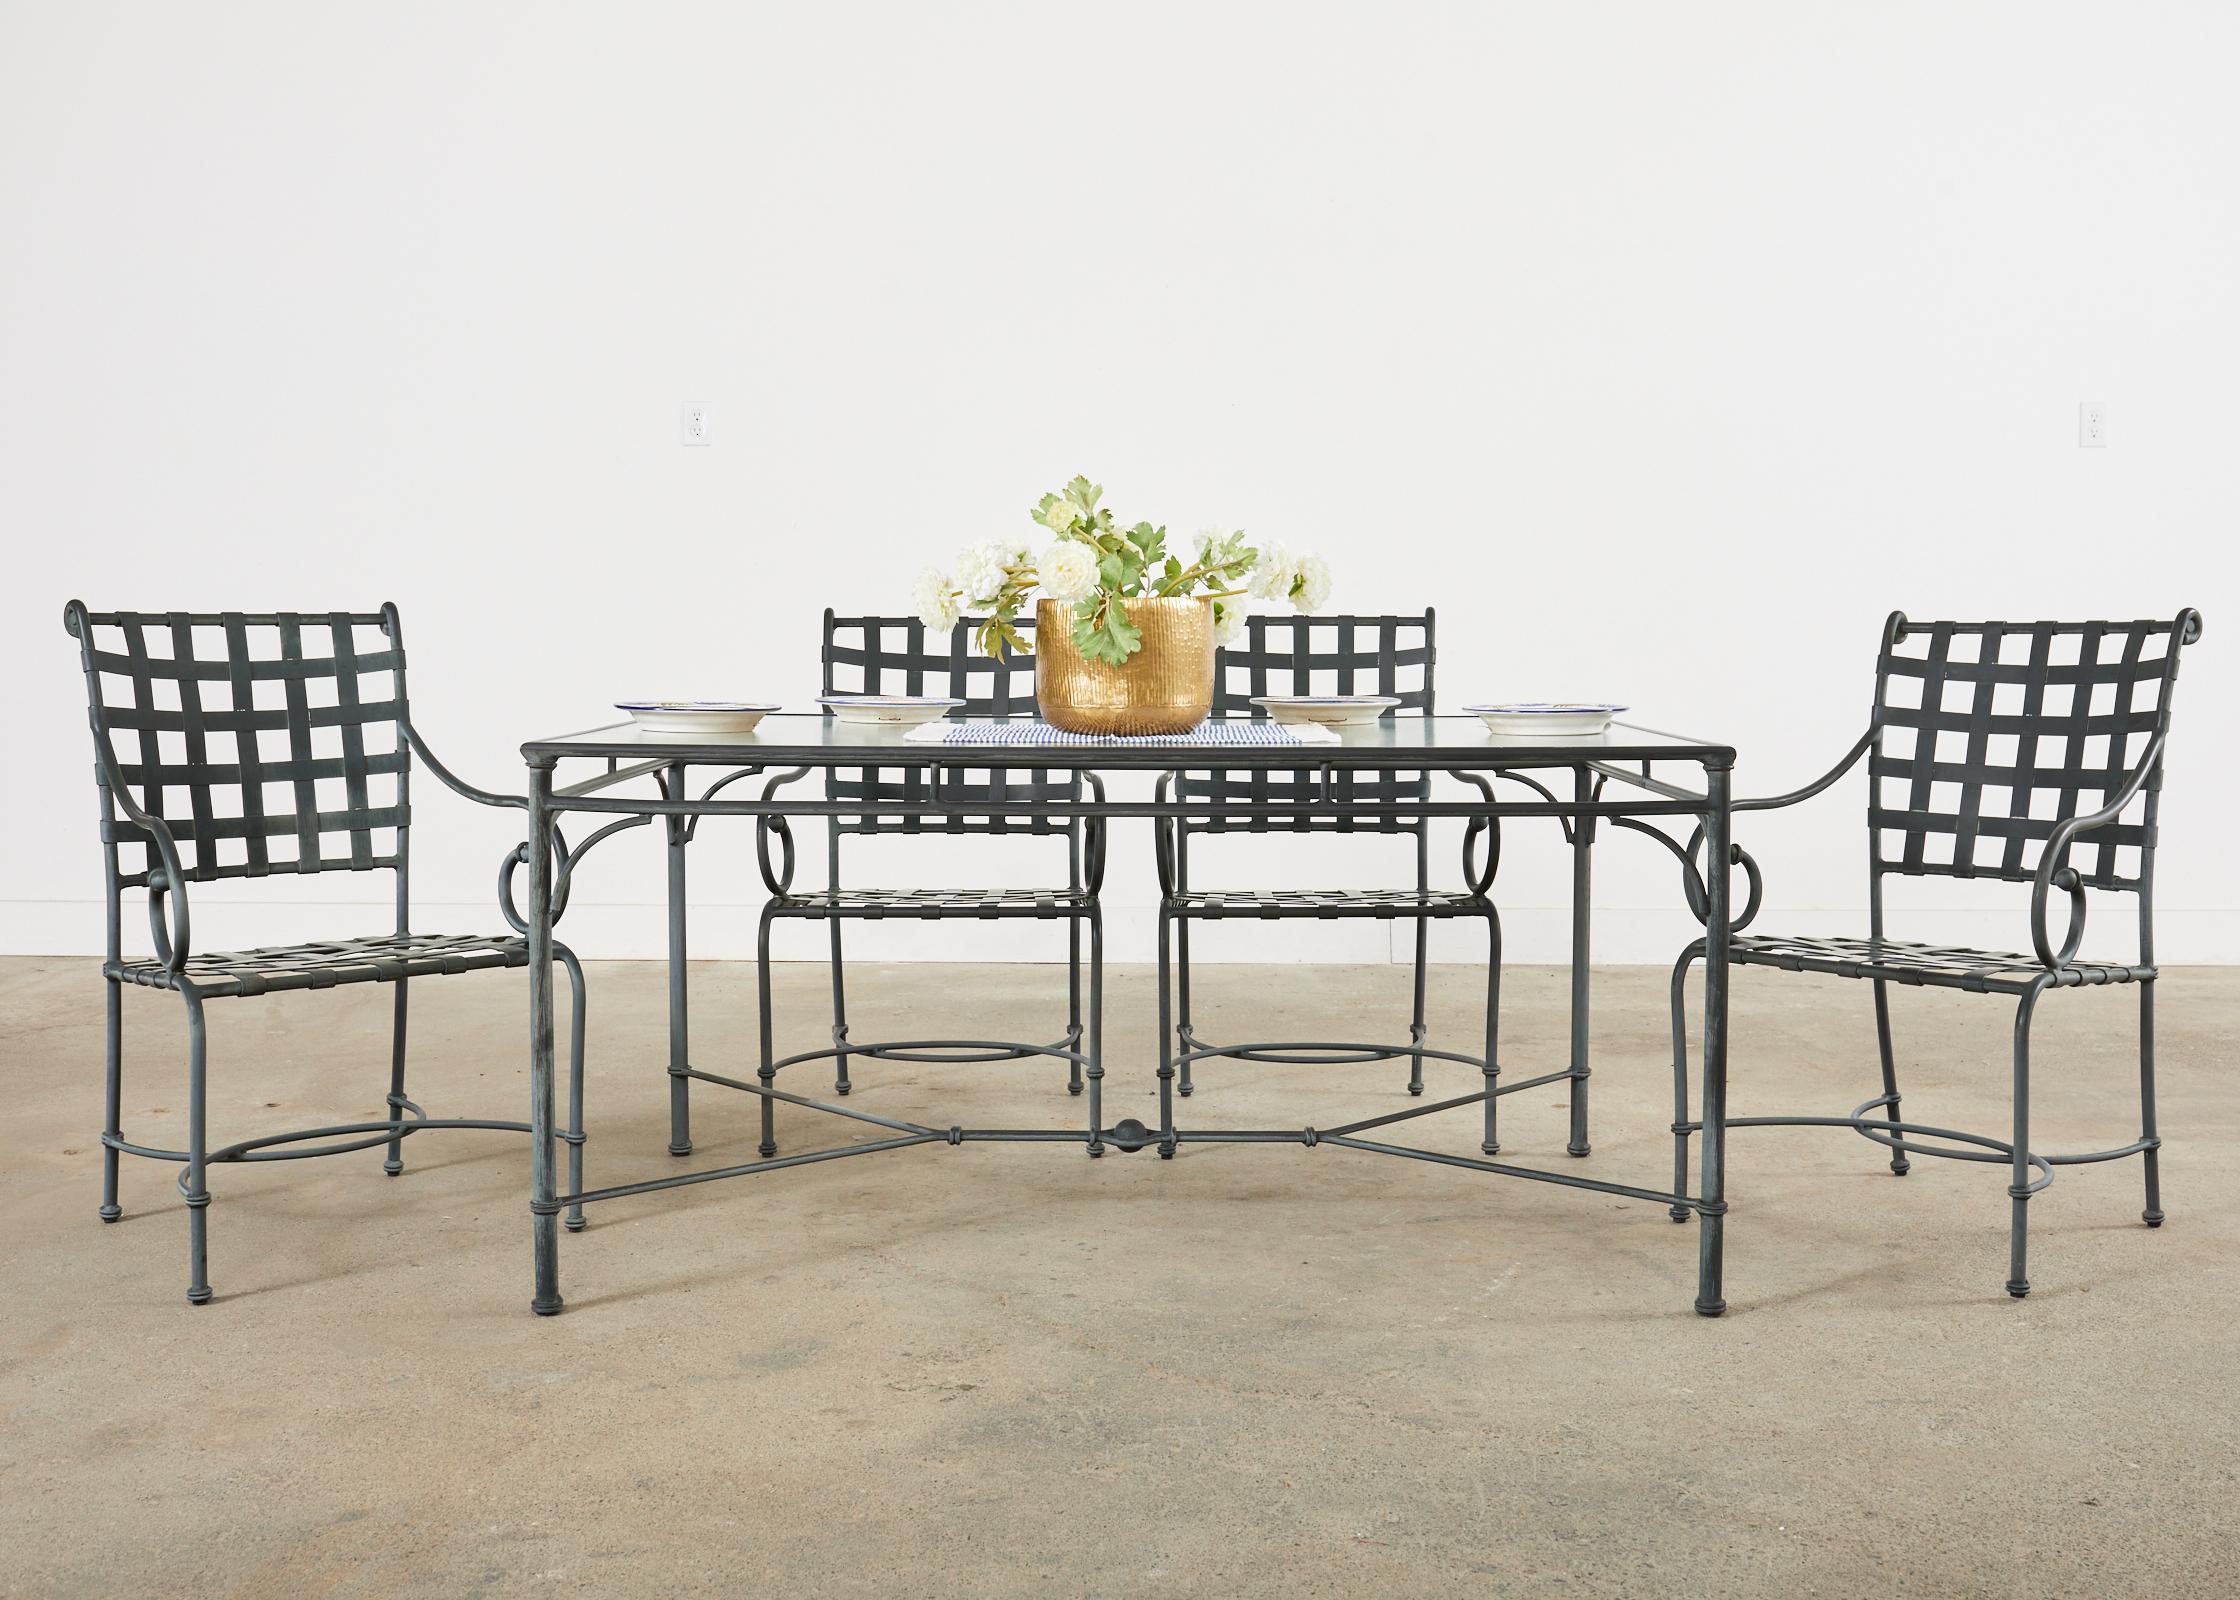 Rare labeled seven piece set of Richard Frinier designed for Brown Jordan patio and garden dining suite consisting of six Florentine aluminum dining armchairs and matching rectangular garden dining table. Purchased from the original owners each